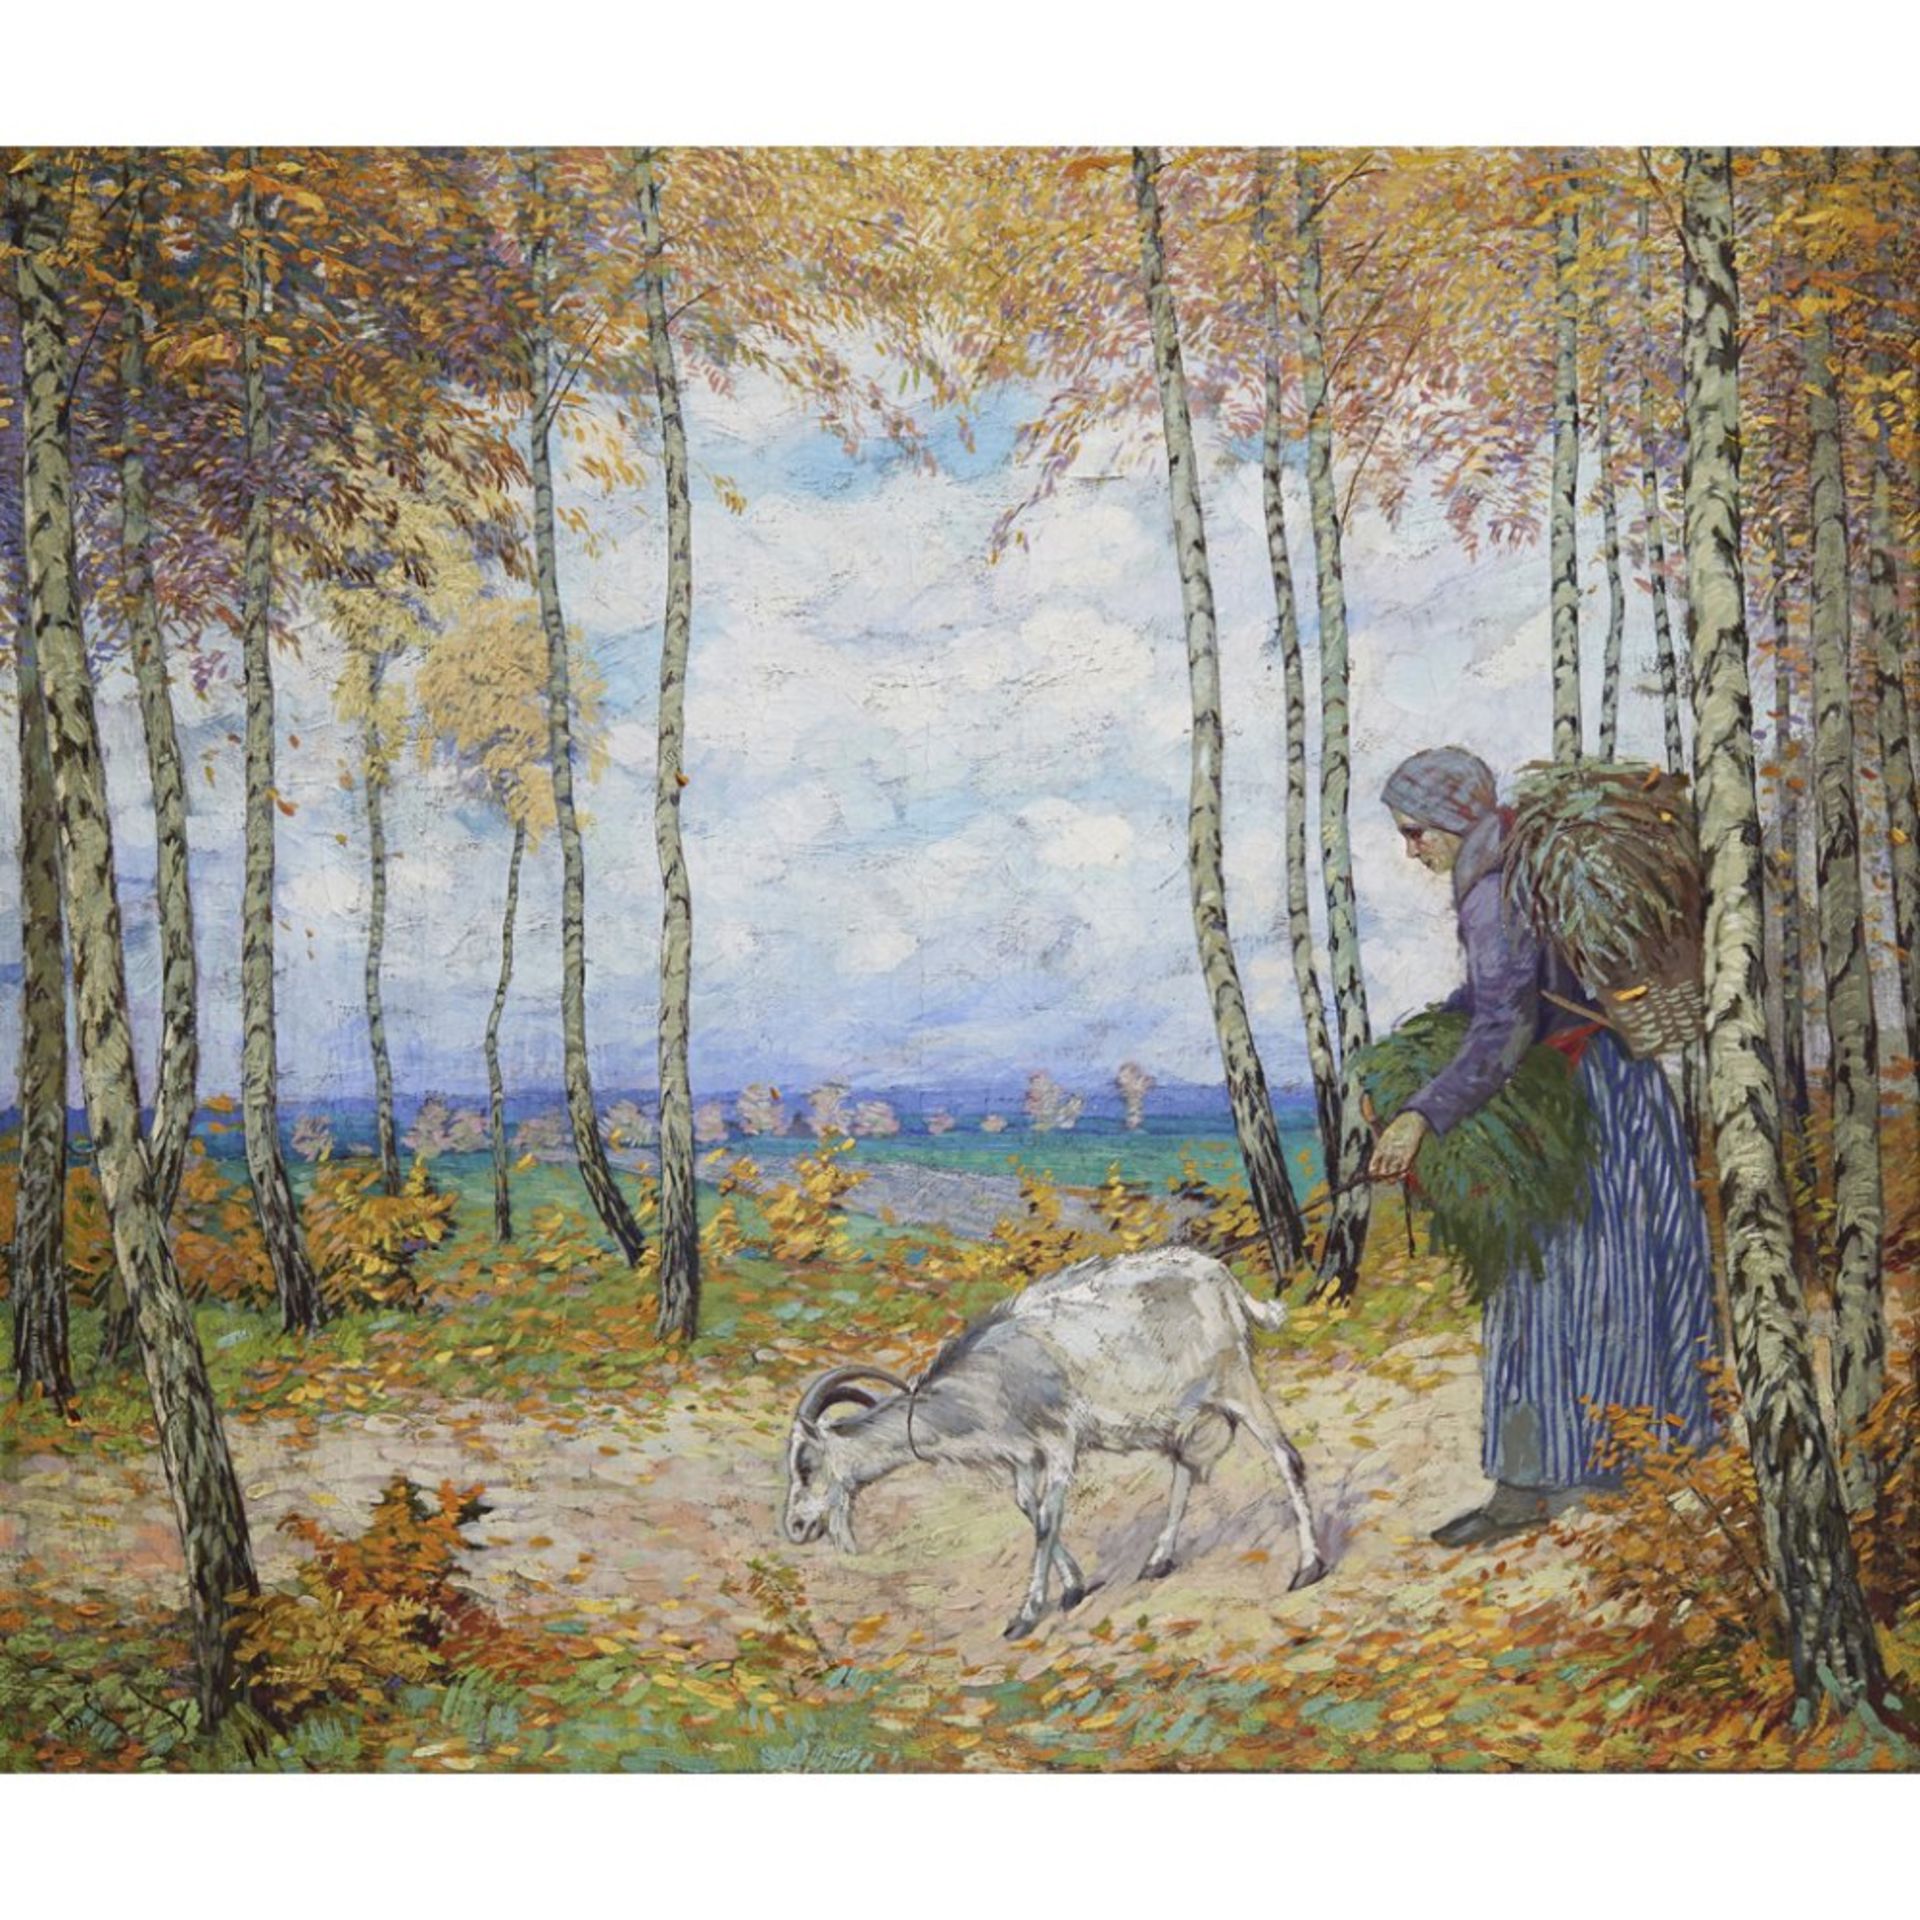 JOSEF STYRN (20TH CENTURY EUROPEAN)TETHERING THE GOAT Signed, oil on canvas58.5cm x 68.5cm (23in x